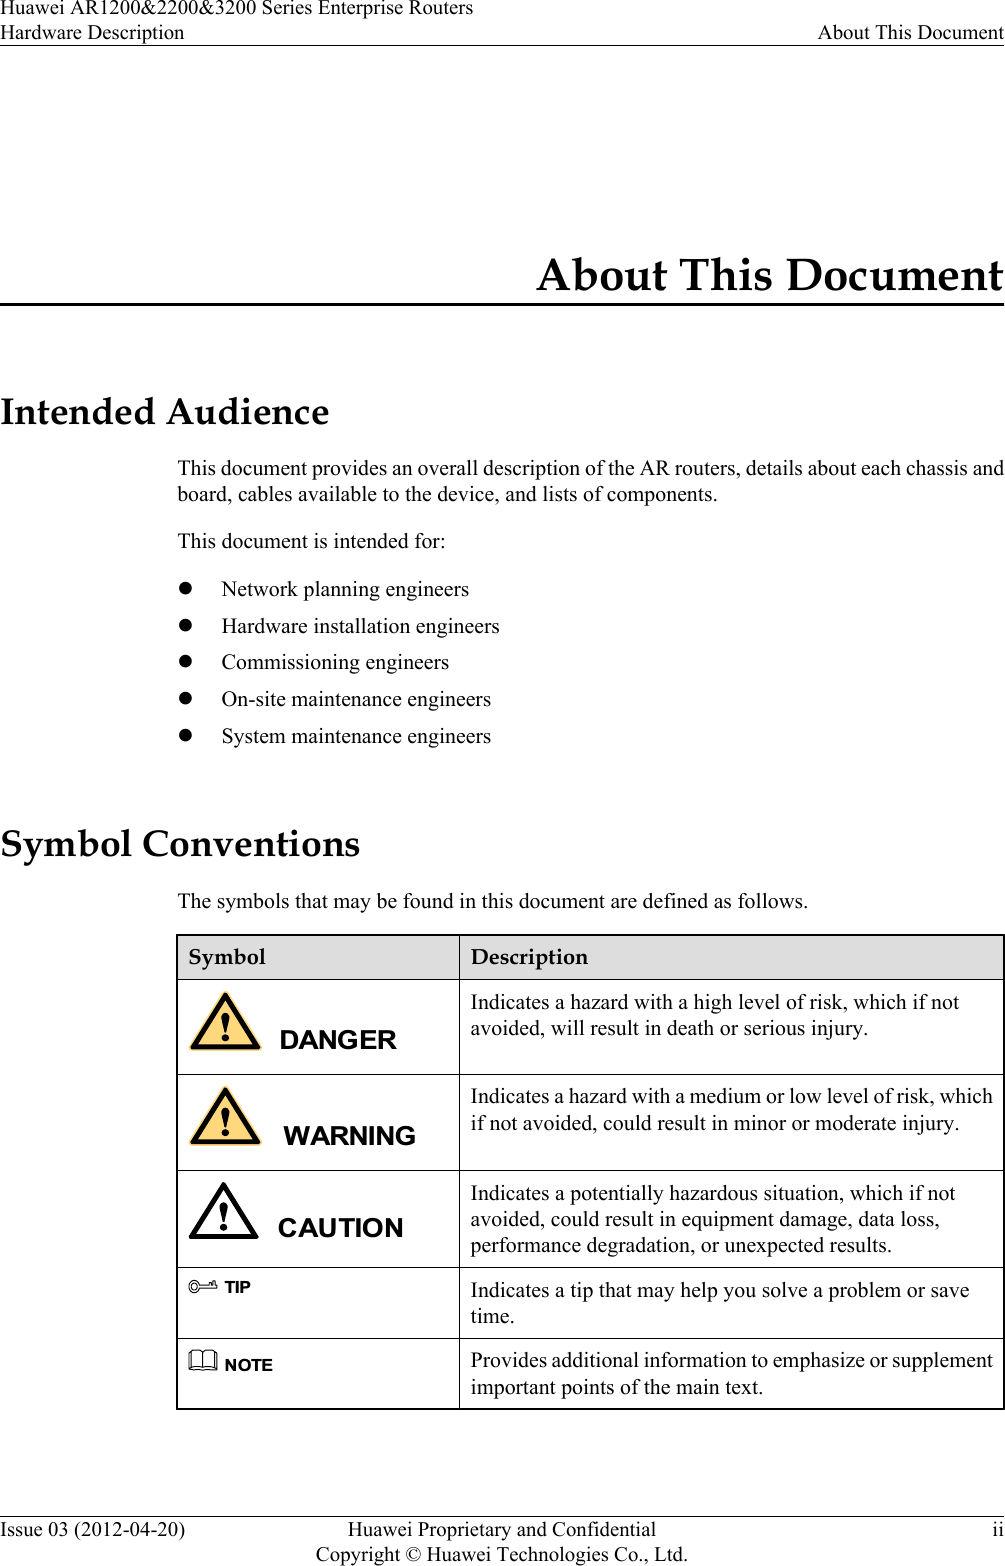 About This DocumentIntended AudienceThis document provides an overall description of the AR routers, details about each chassis andboard, cables available to the device, and lists of components.This document is intended for:lNetwork planning engineerslHardware installation engineerslCommissioning engineerslOn-site maintenance engineerslSystem maintenance engineersSymbol ConventionsThe symbols that may be found in this document are defined as follows.Symbol DescriptionDANGERIndicates a hazard with a high level of risk, which if notavoided, will result in death or serious injury.WARNINGIndicates a hazard with a medium or low level of risk, whichif not avoided, could result in minor or moderate injury.CAUTIONIndicates a potentially hazardous situation, which if notavoided, could result in equipment damage, data loss,performance degradation, or unexpected results.TIPIndicates a tip that may help you solve a problem or savetime.NOTEProvides additional information to emphasize or supplementimportant points of the main text. Huawei AR1200&amp;2200&amp;3200 Series Enterprise RoutersHardware Description About This DocumentIssue 03 (2012-04-20) Huawei Proprietary and ConfidentialCopyright © Huawei Technologies Co., Ltd.ii